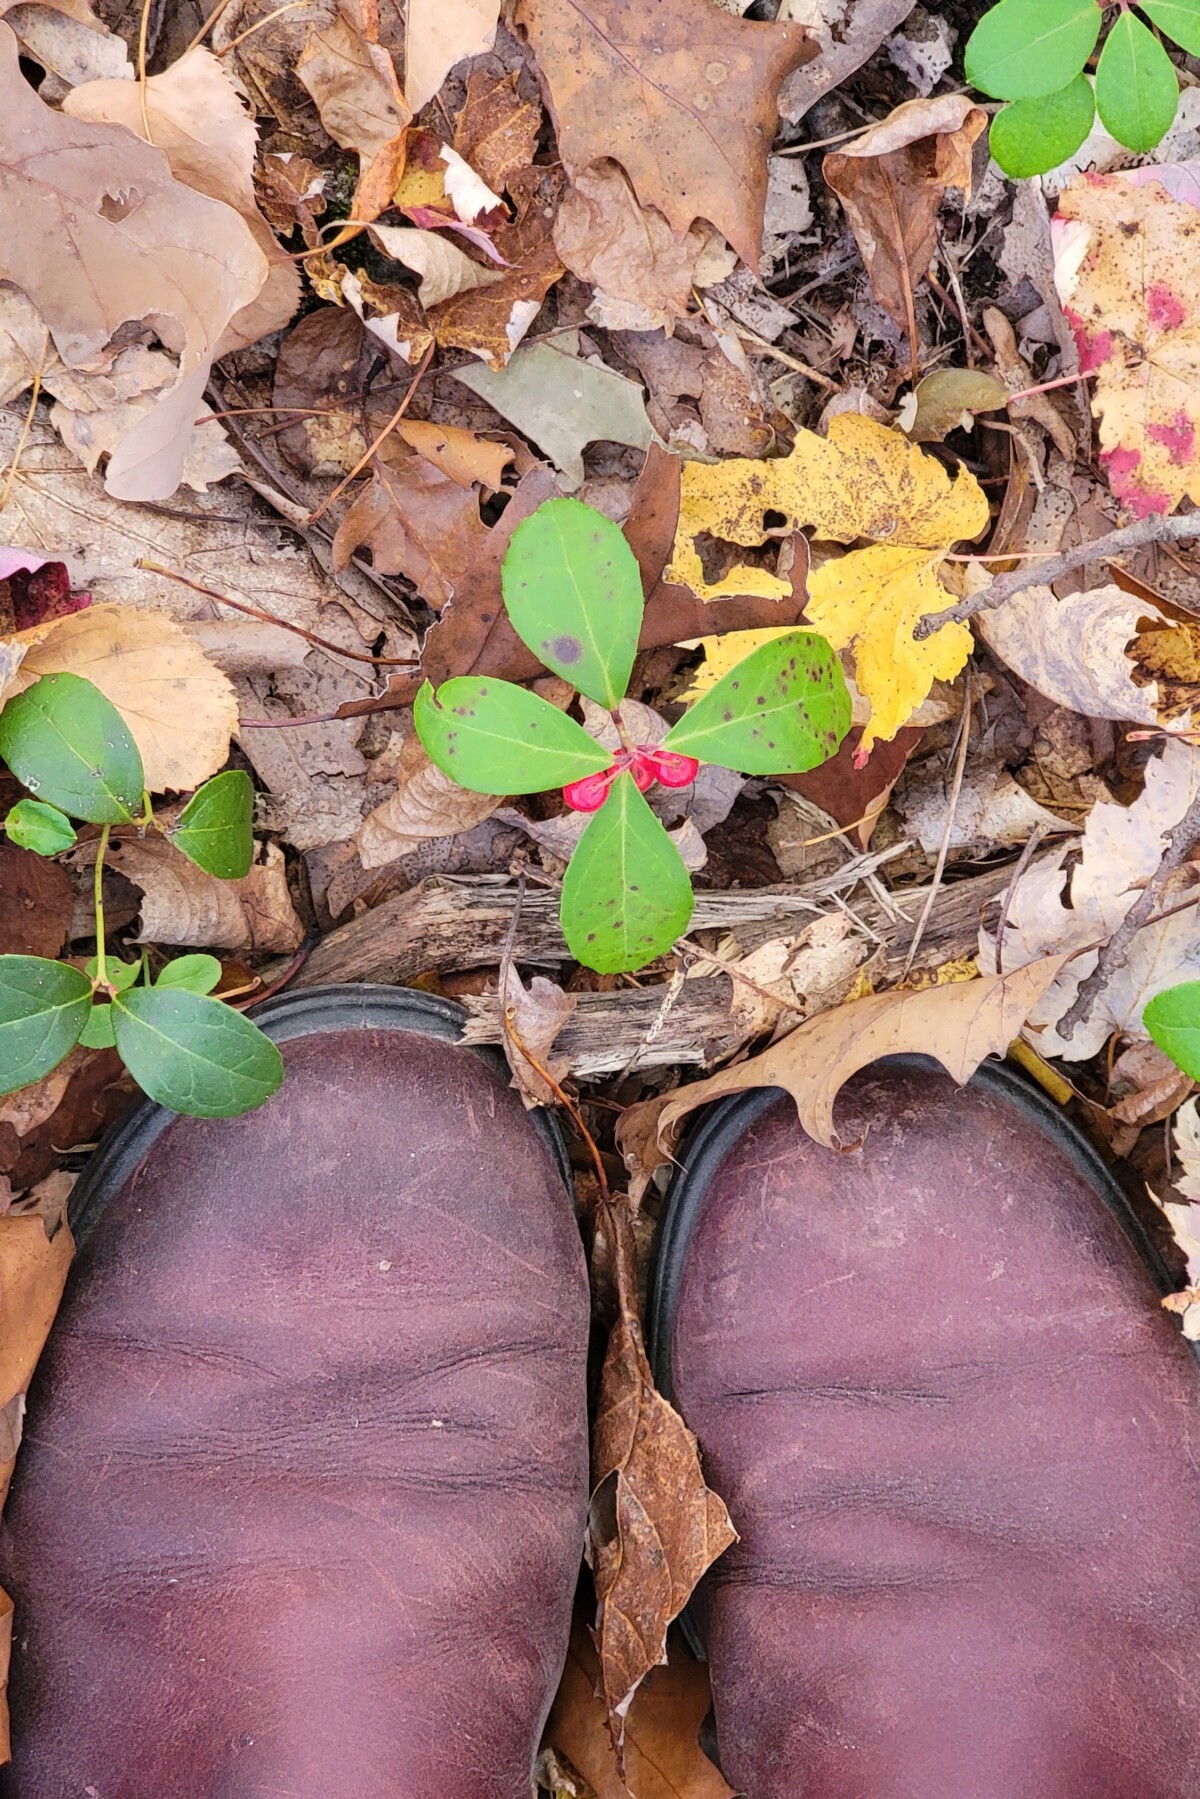 Wild wintergreen plant growing on forest floor, woman's boots in the picture